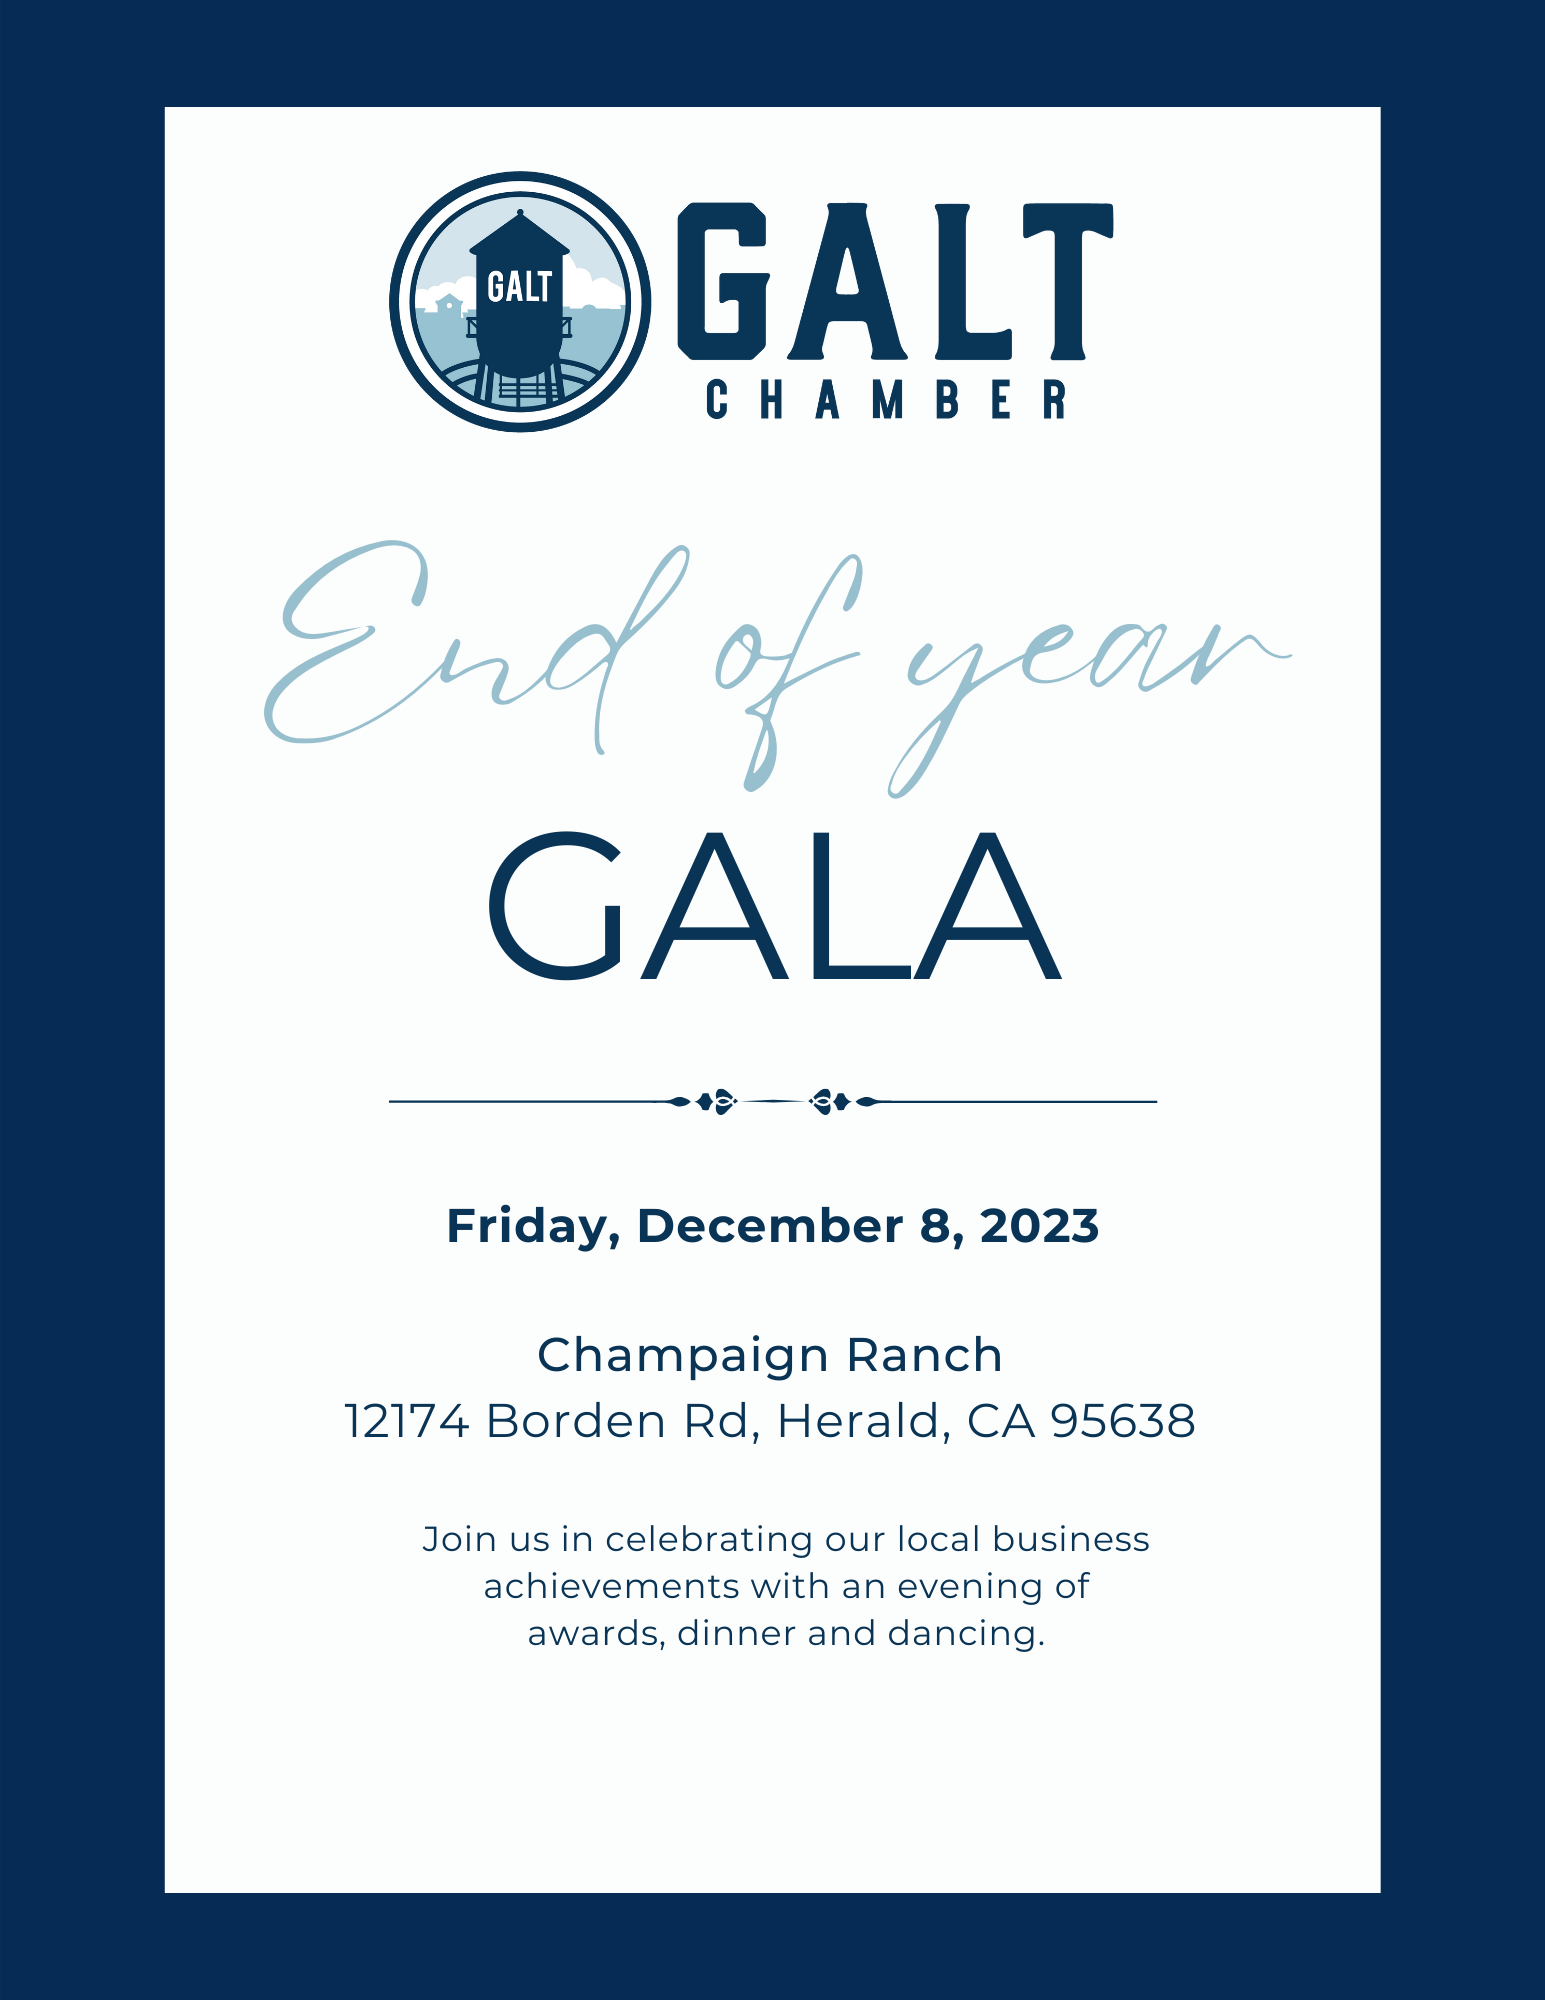 End Of Year Gala - Flyer (1) (1)